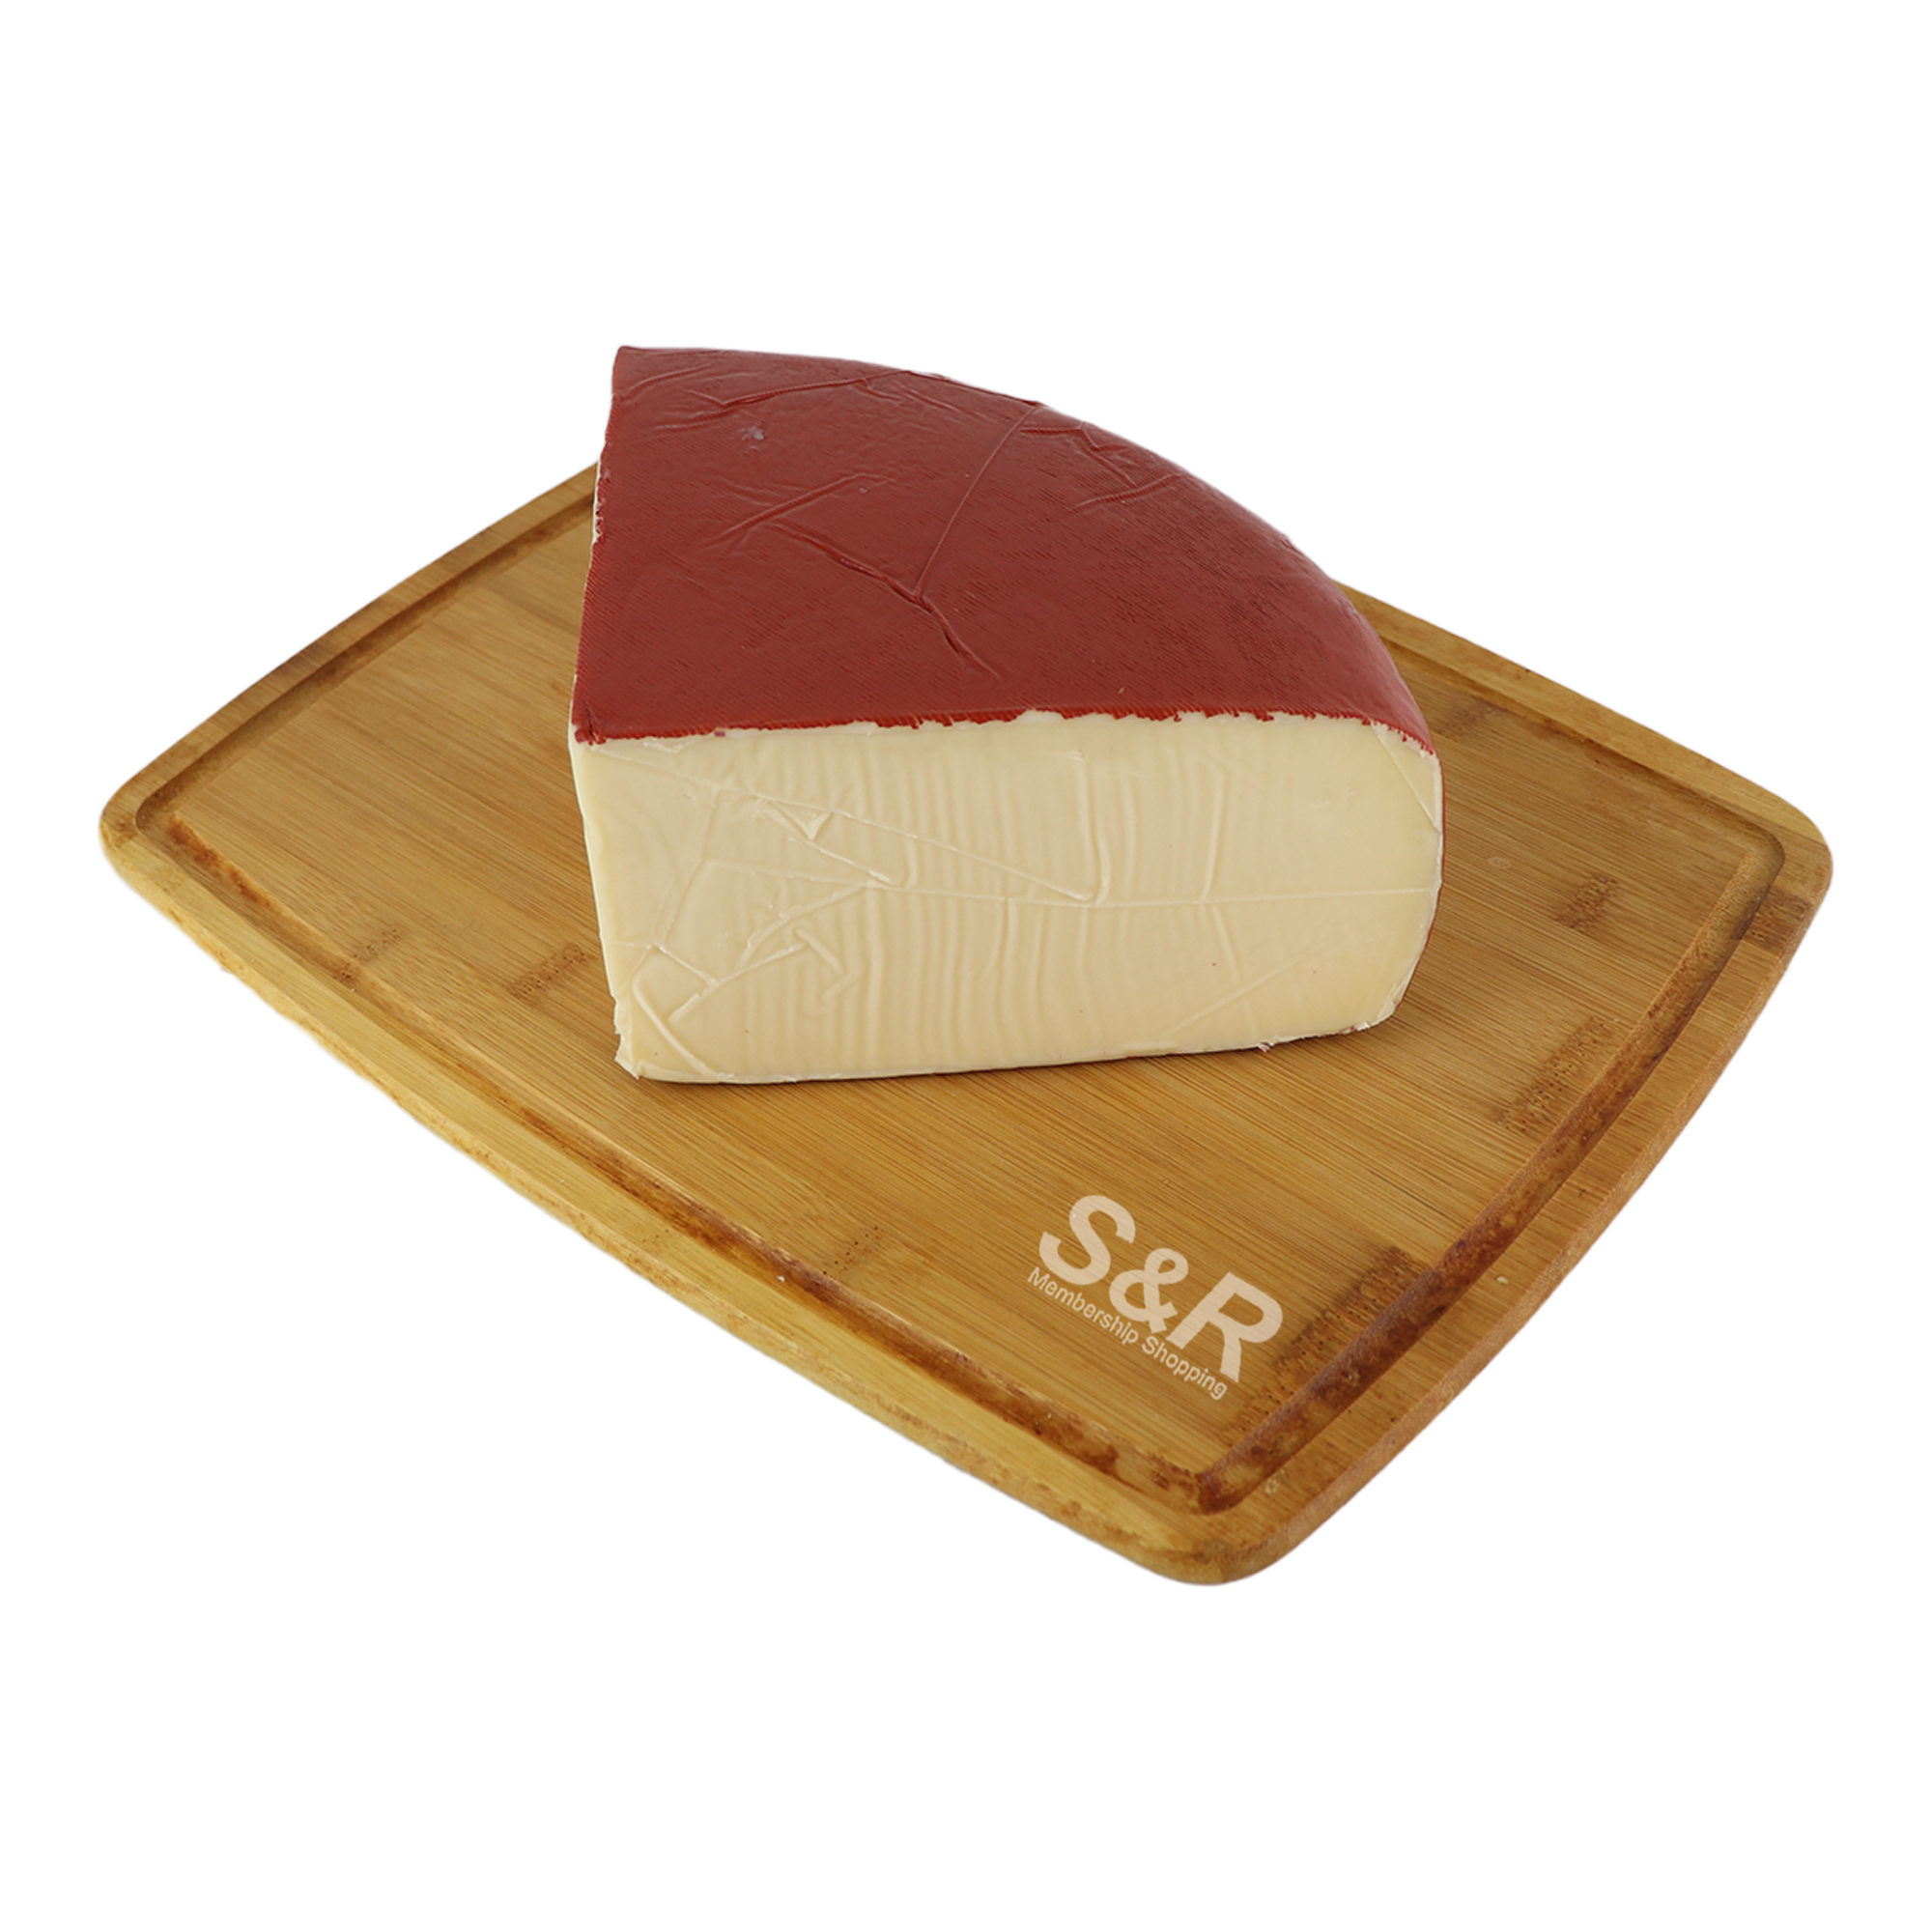 S&R Fontina Cheese approx. 2kg